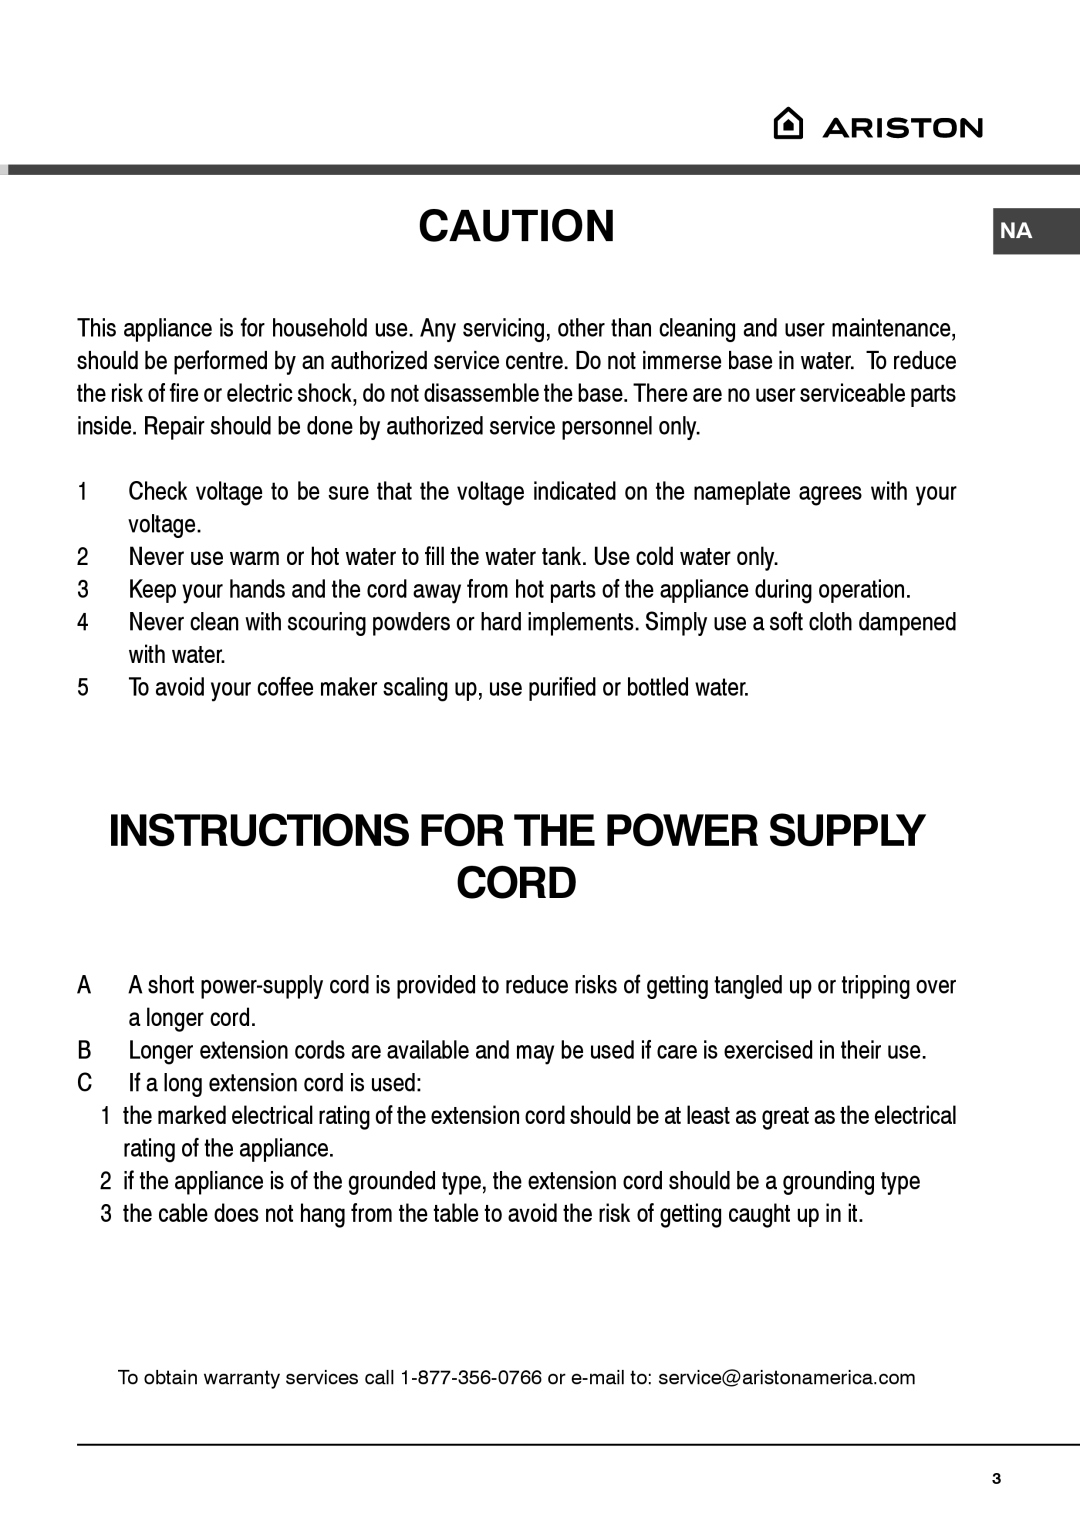 Ariston MCA15NAP manual Instructions for the Power Supply Cord 